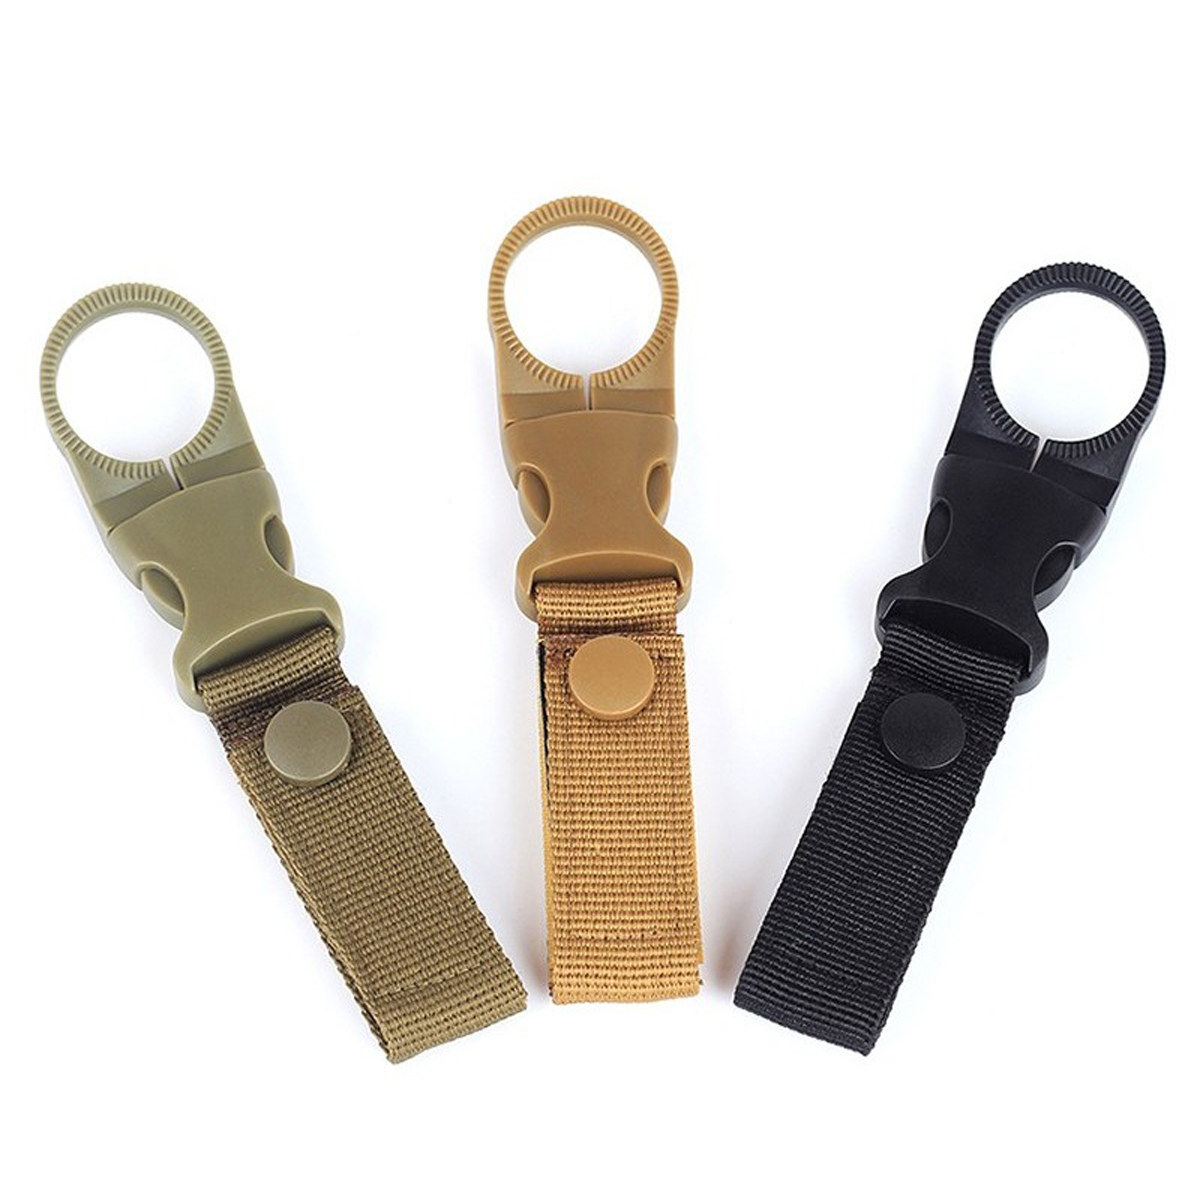 AWMN-R1-Gear-Clip-Nylon-Camouflage-Outdoor-Camping-Mountaineering-Buckle-Water-Bottle-Carrier-Holder-1340521-1